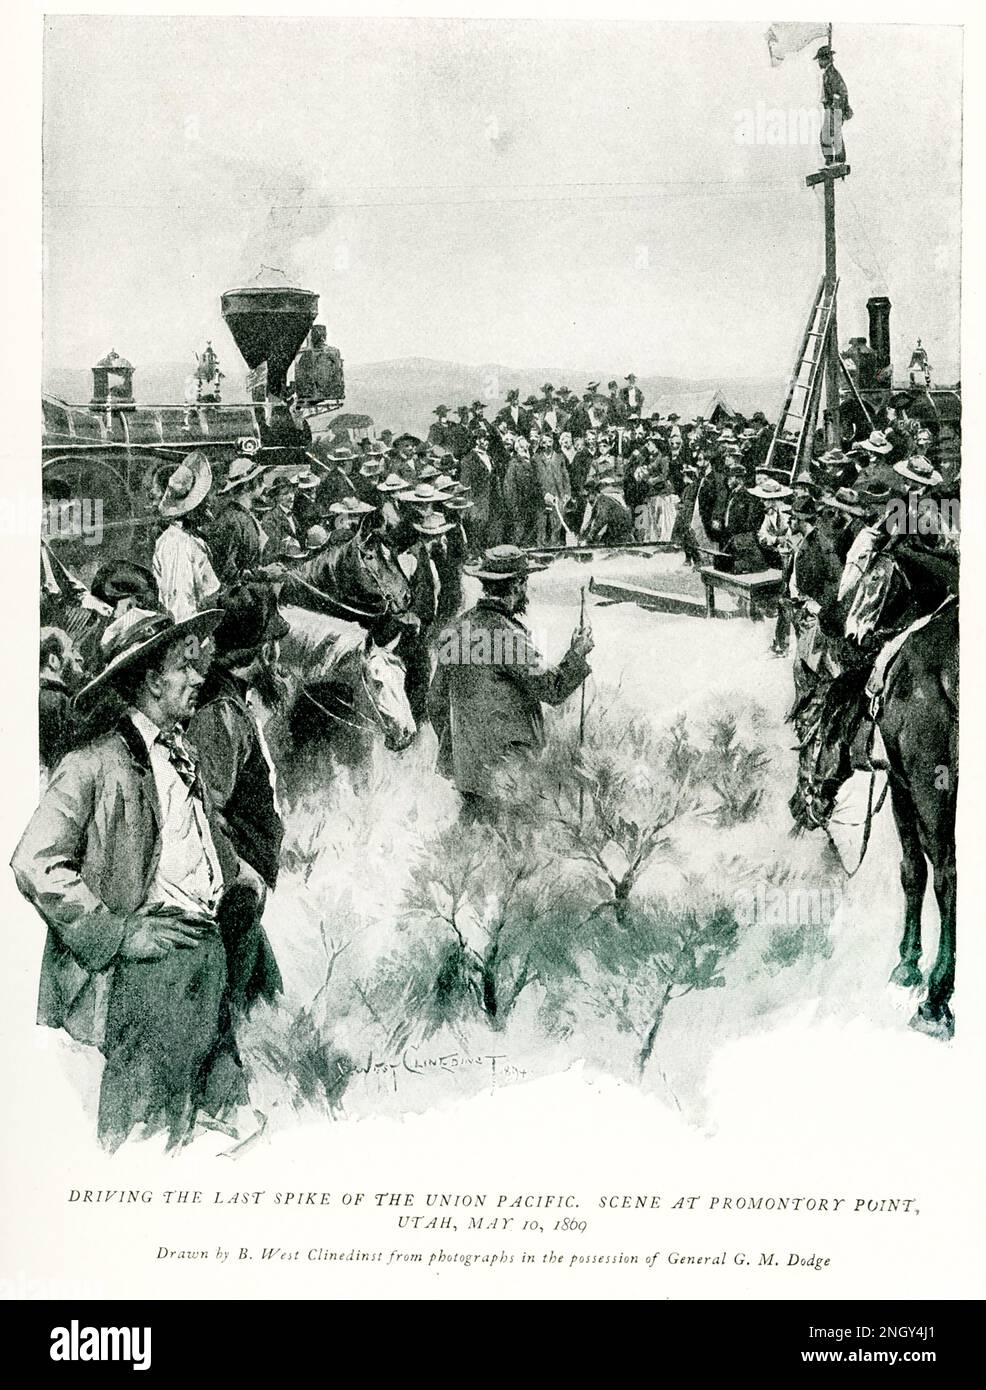 Tye 1896 caption reads: 'Driving last Spike of Union Pacific scene at Promontory Point Utah May 10 1869 - Drawn by B West Clinedinst from photograph in possession of General G M Dodge.' Benjamin West Clinedinst was an American book illustrator and portrait painter. Stock Photo